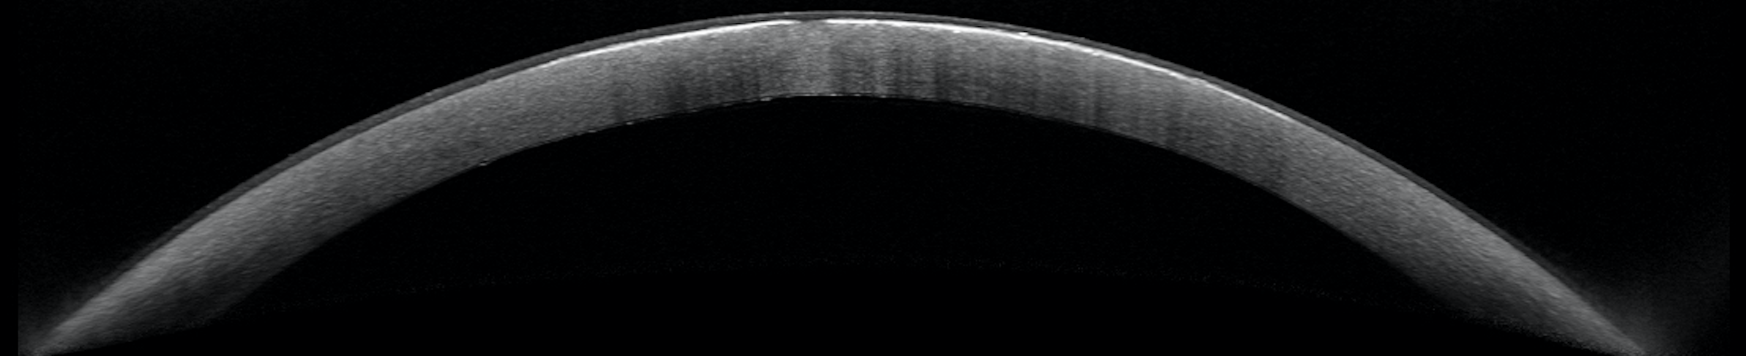 Figure 2. Anterior segment OCT of OD with subepithelial hyper-reflection.